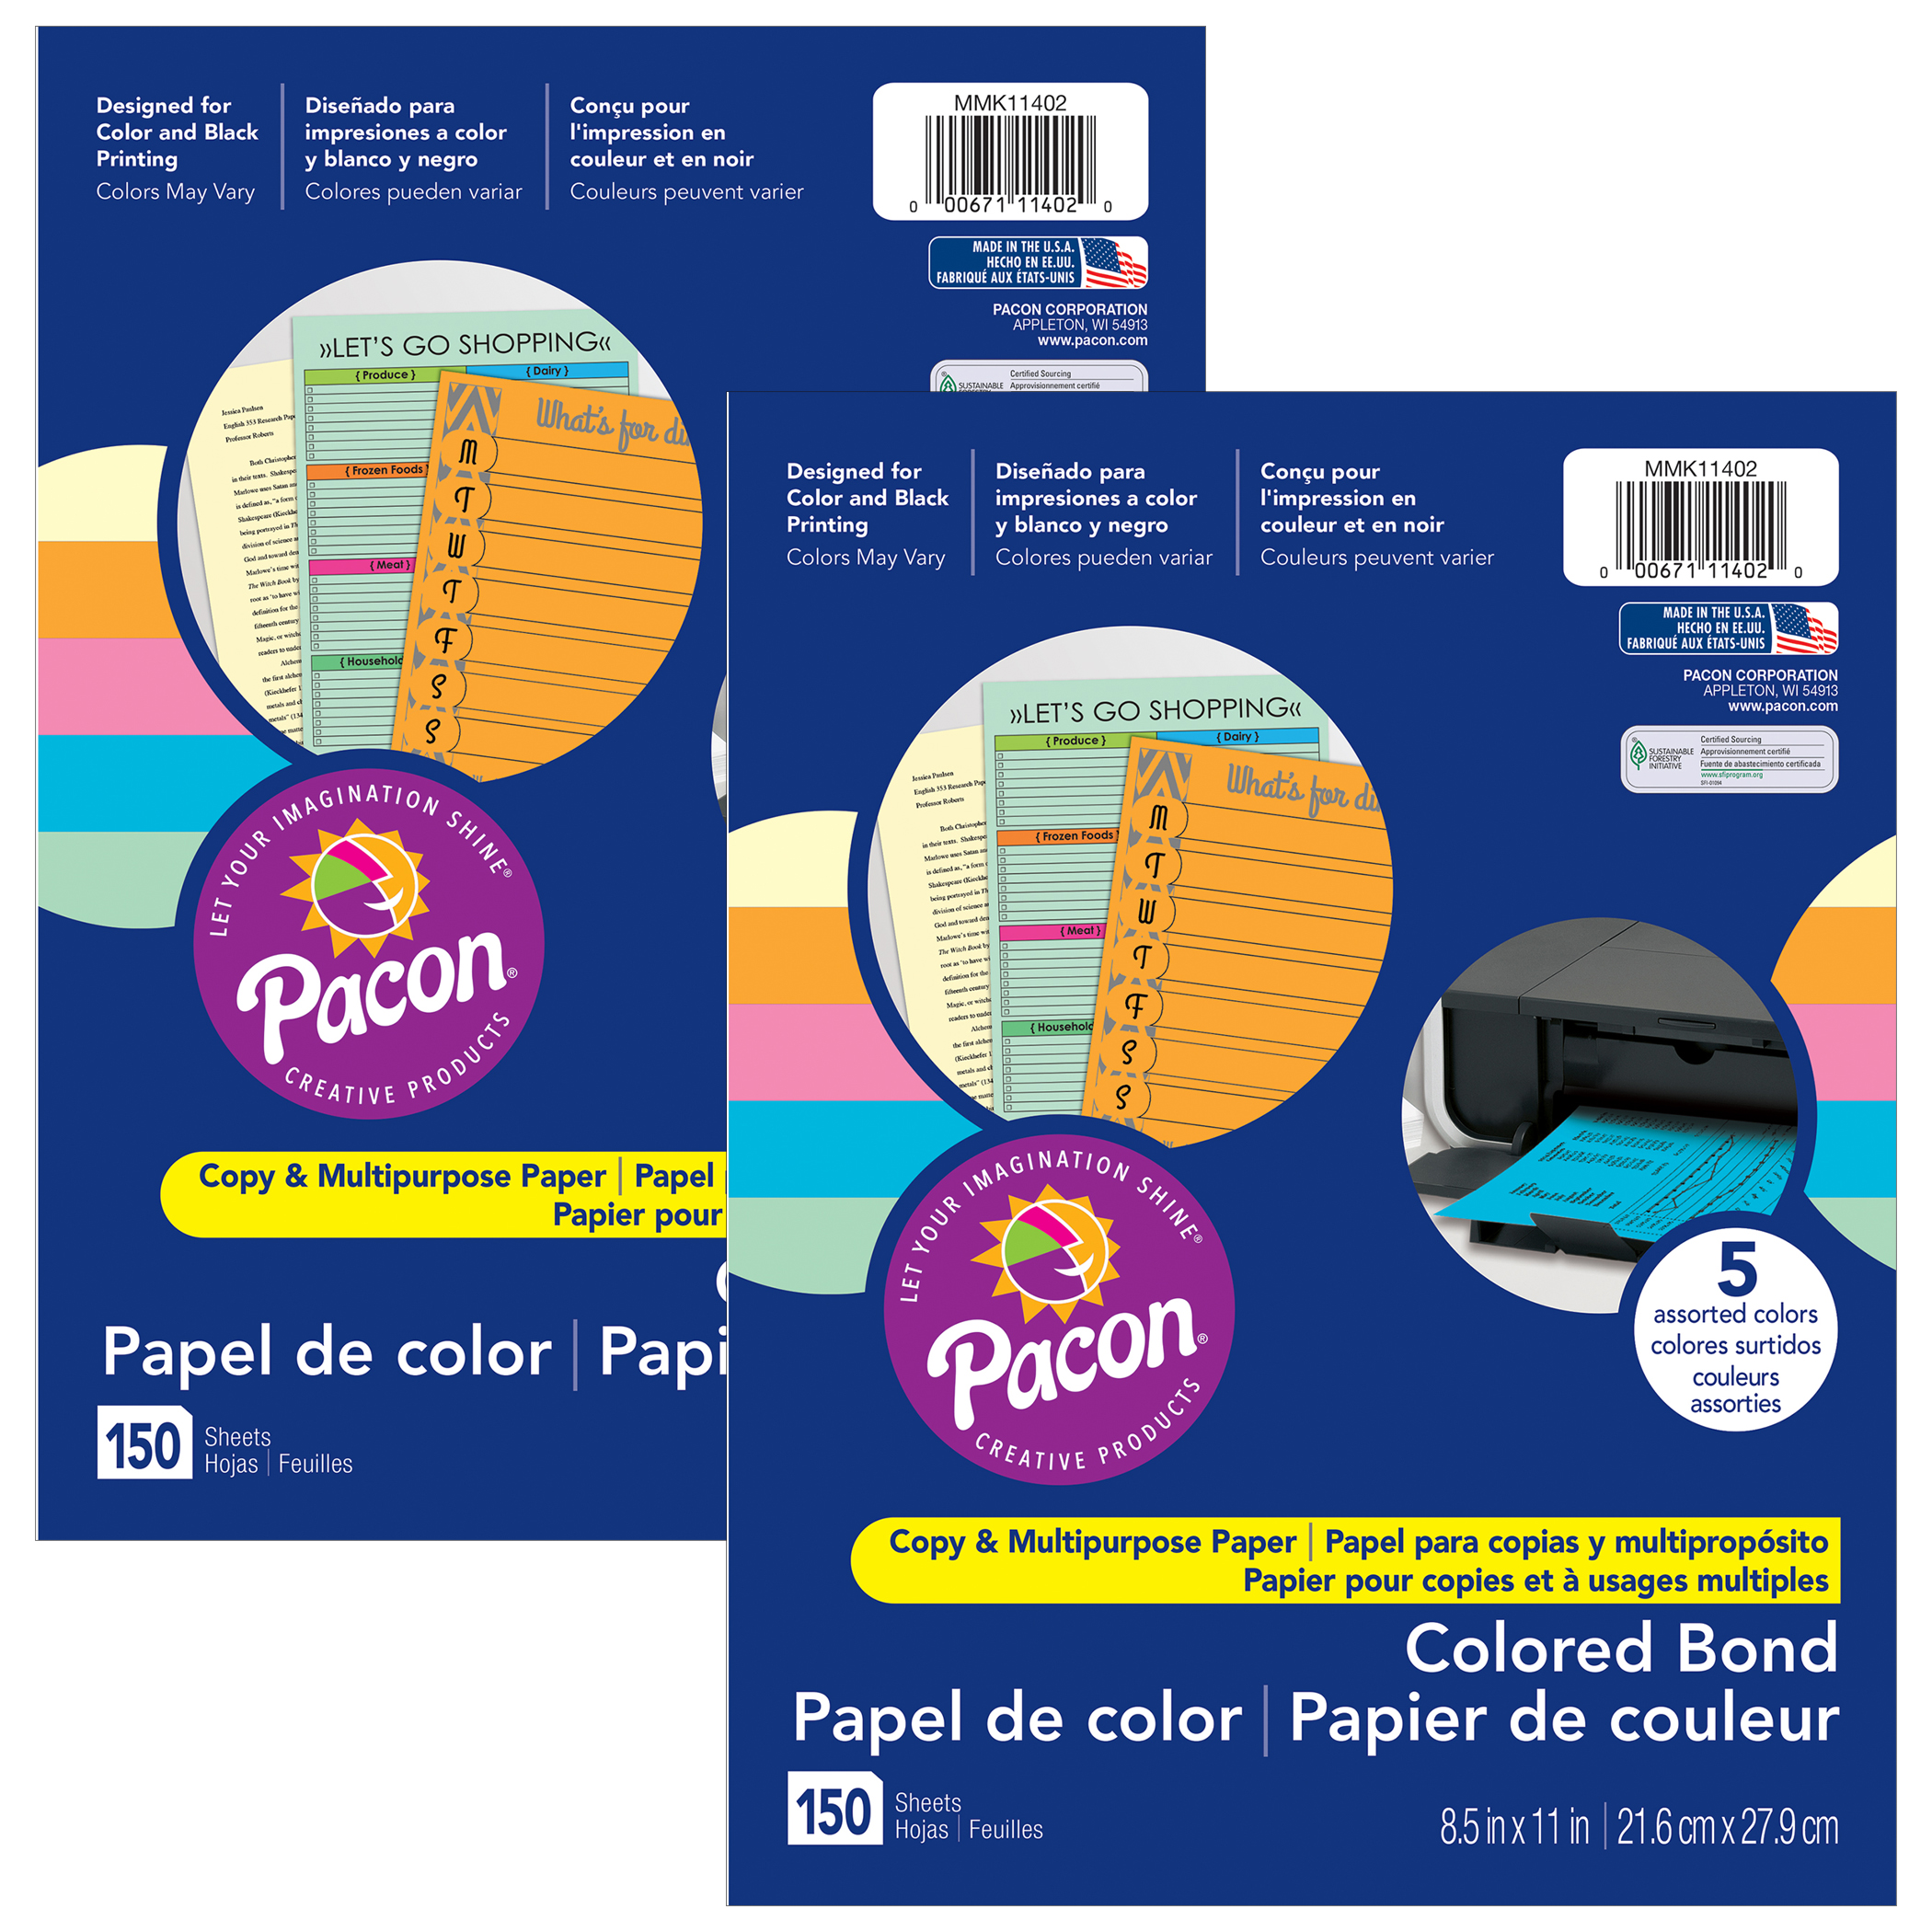 Pacon Bright Multi-Purpose Paper, 5 Assorted Colors, 20 lb., 8-1/2 x 11, 100 Sheets per Pack, 3 Packs